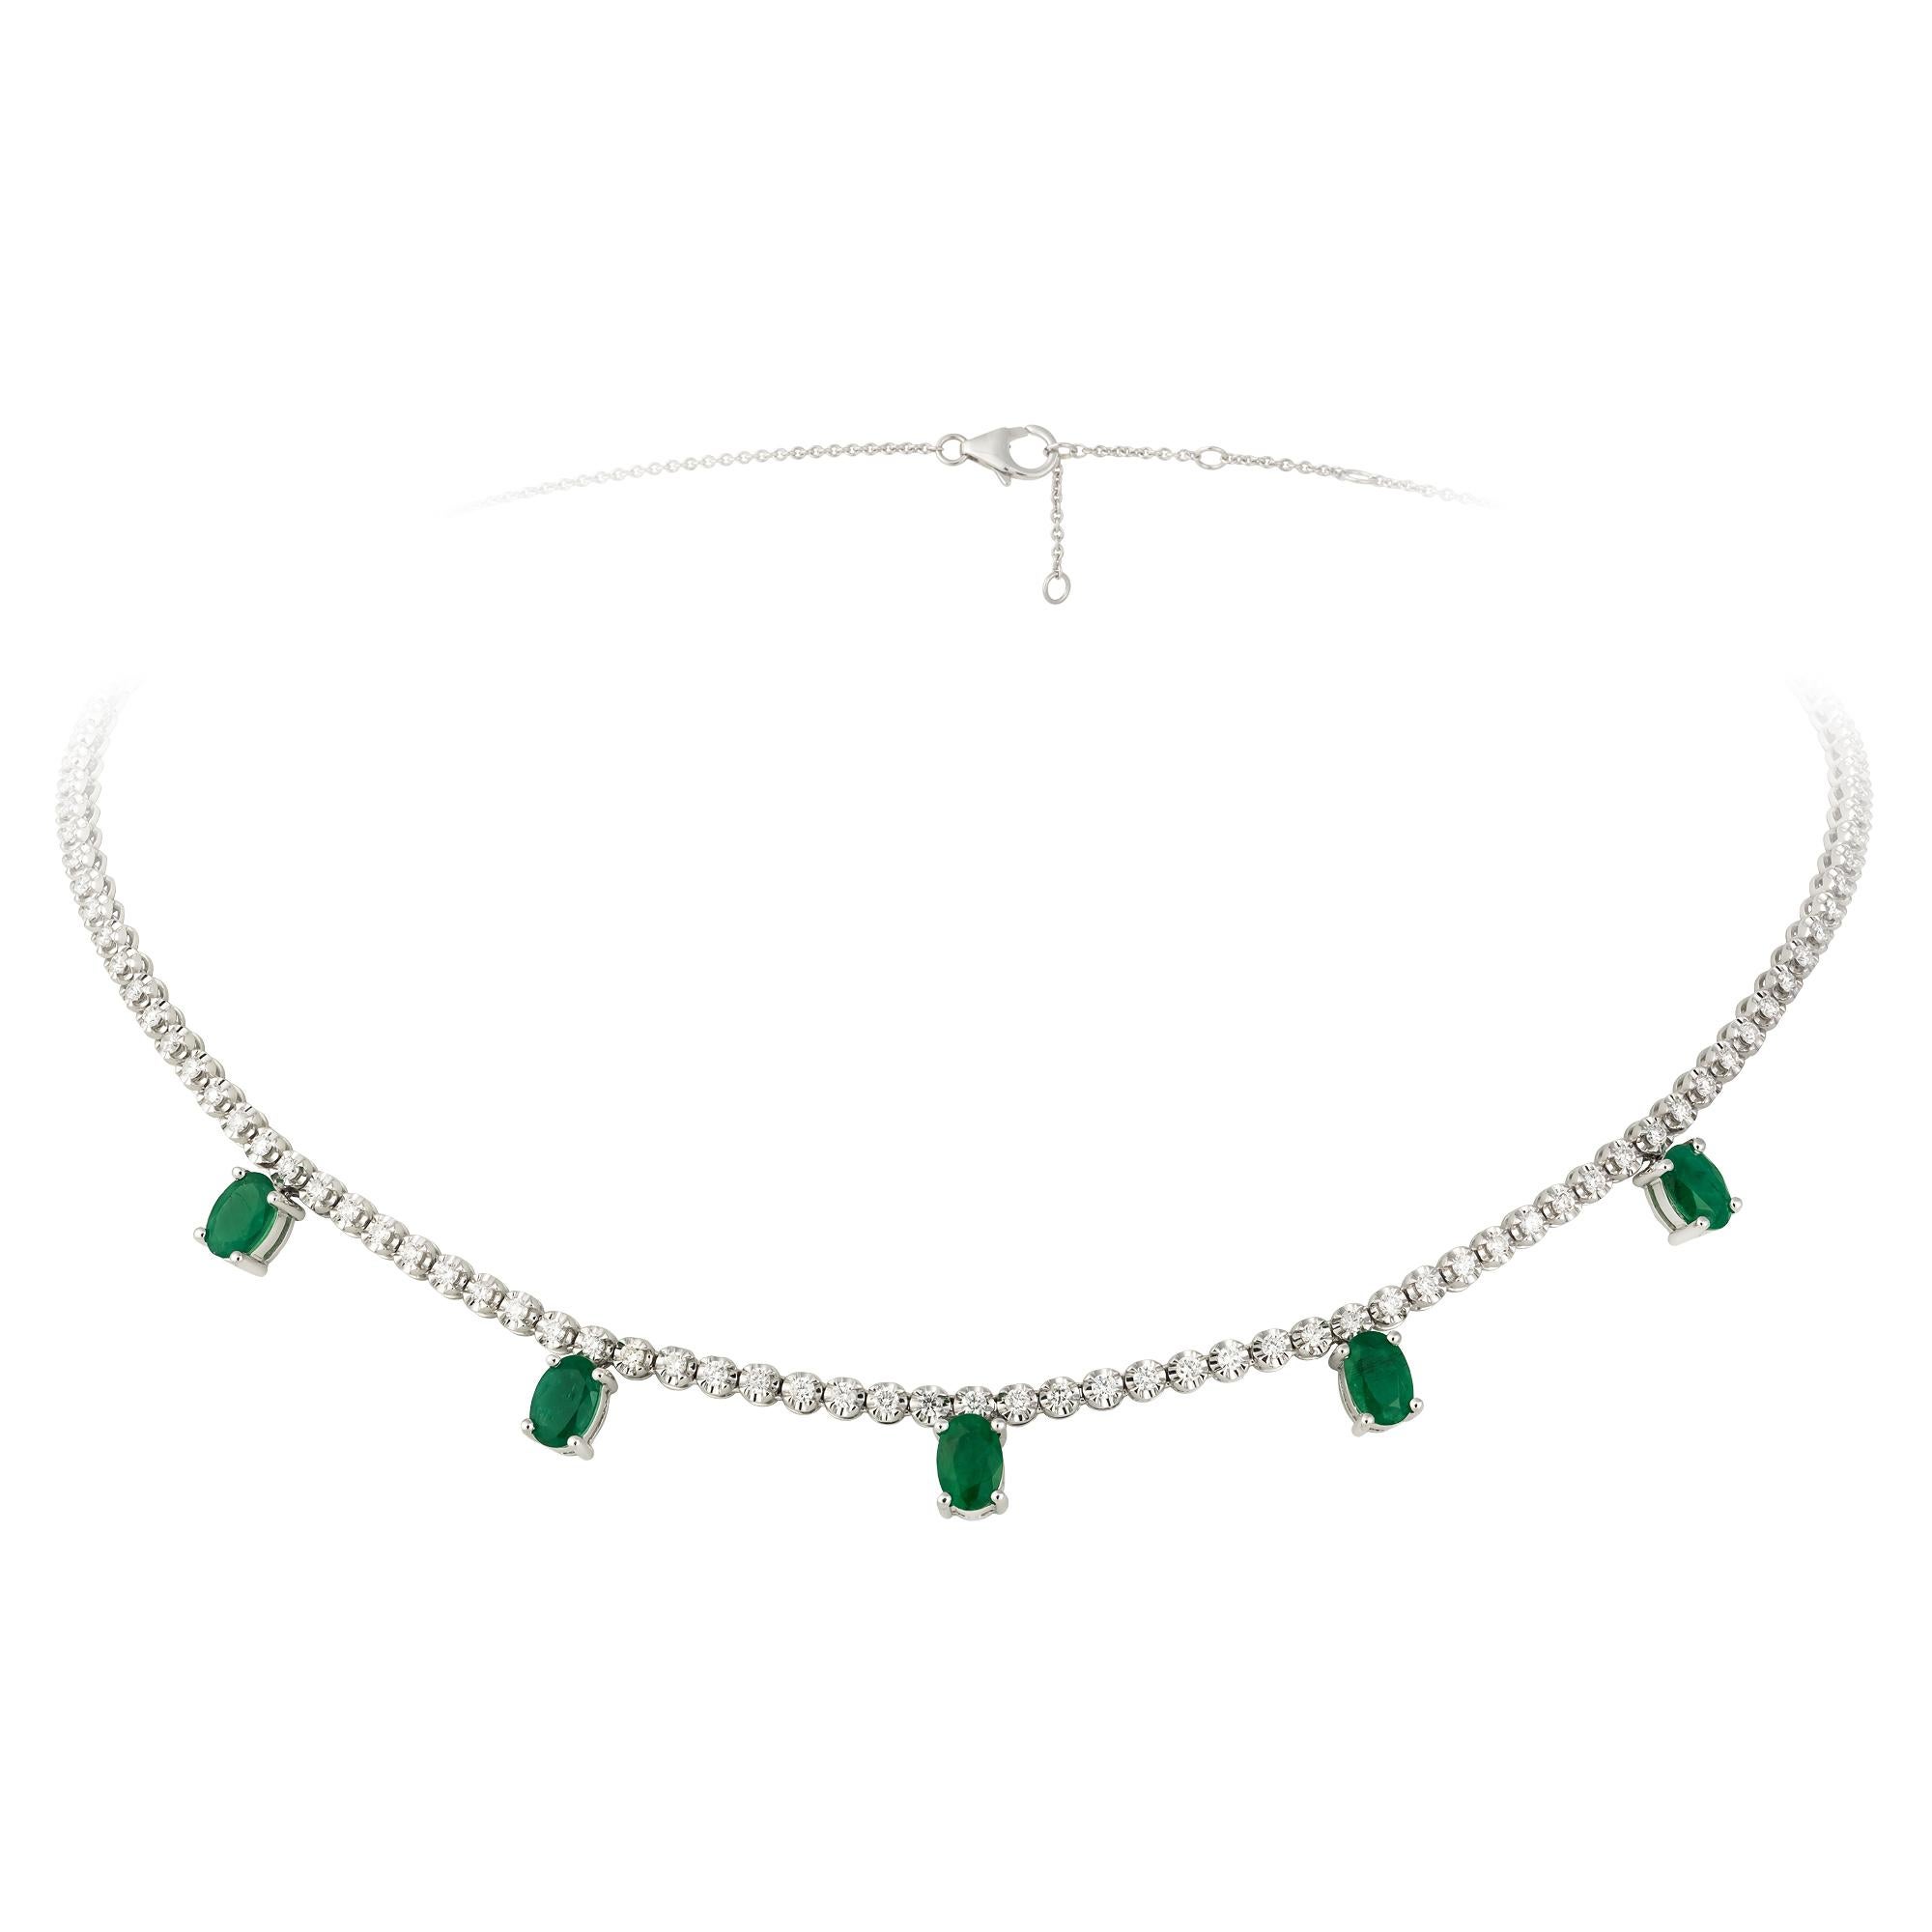 Antique Cushion Cut Fashionable Circle Emerald Diamond 18k White Gold Necklace Choker for Her For Sale